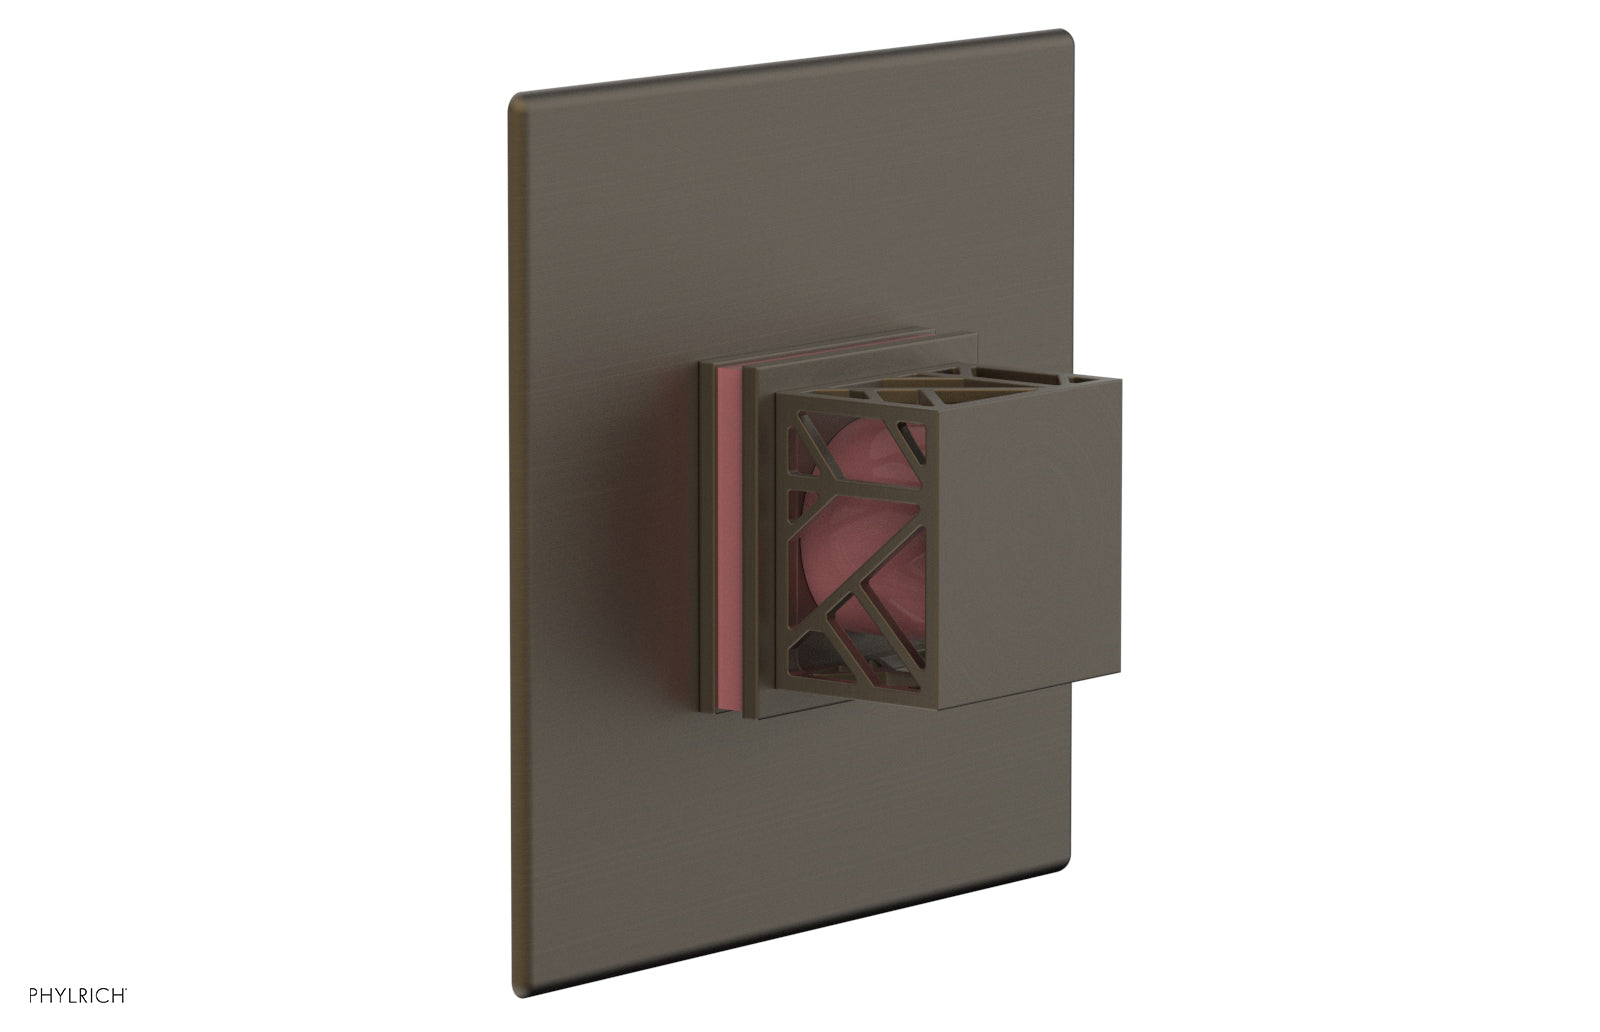 Phylrich JOLIE Thermostatic Shower Trim, Square Handle with "Pink" Accents